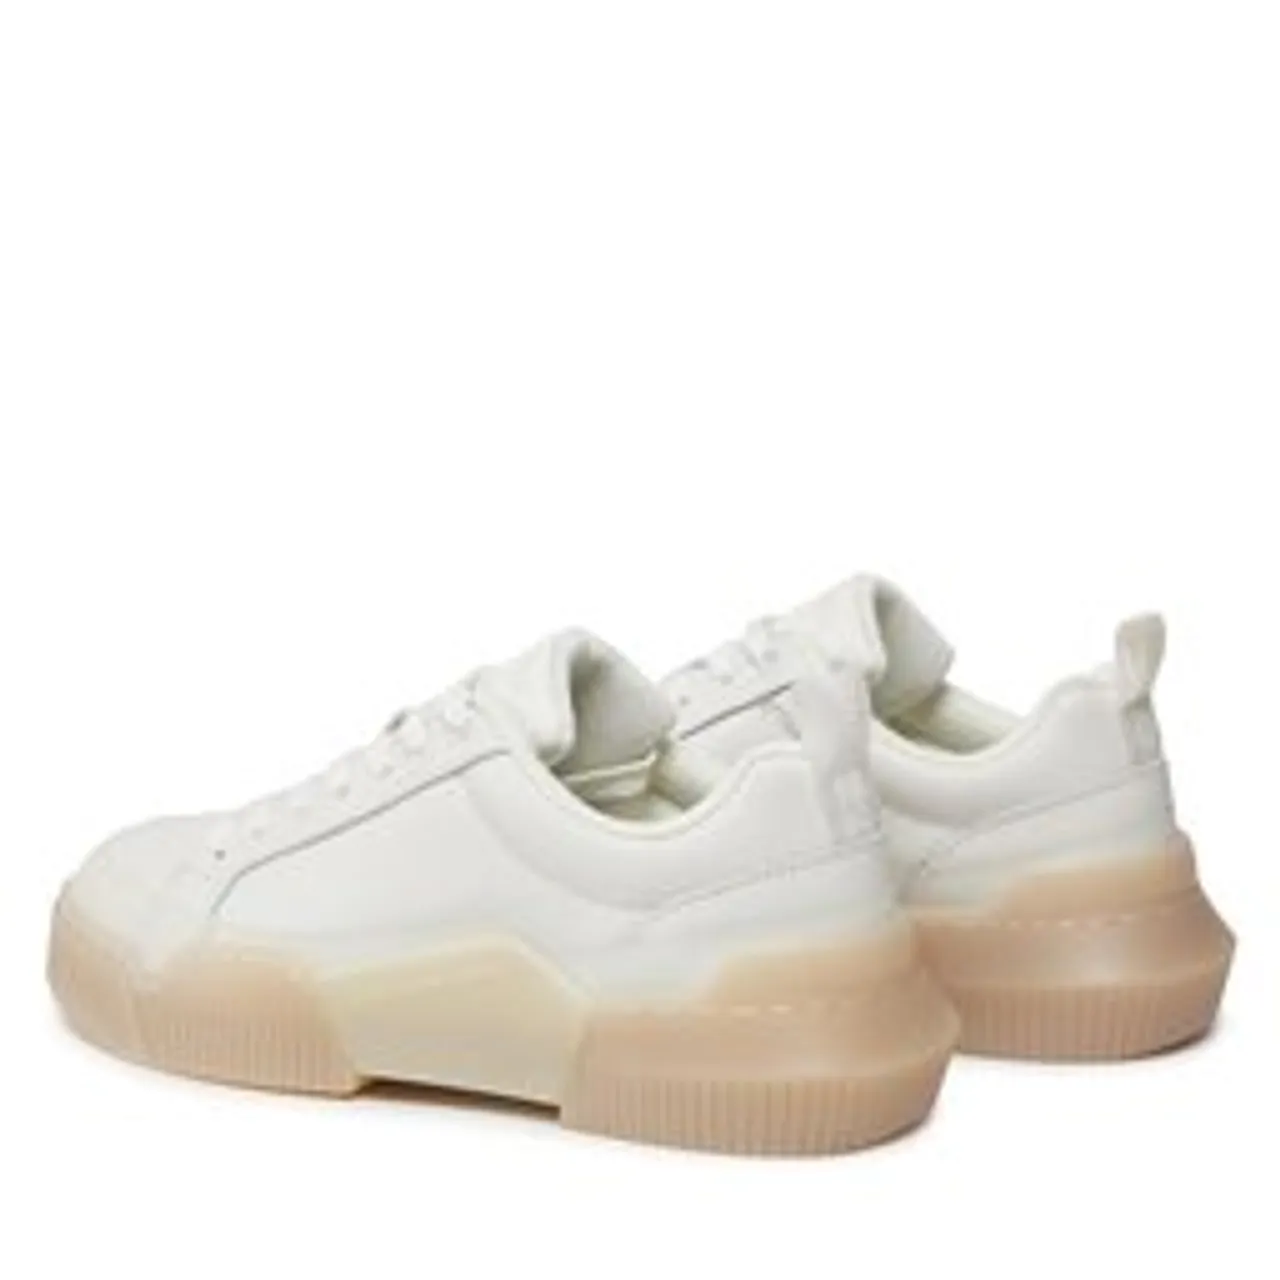 Sneakers Calvin Klein Jeans Chunky Cupsole 2.0 Lth In Lum YW0YW01313 Bright White/Creamy White 02Y